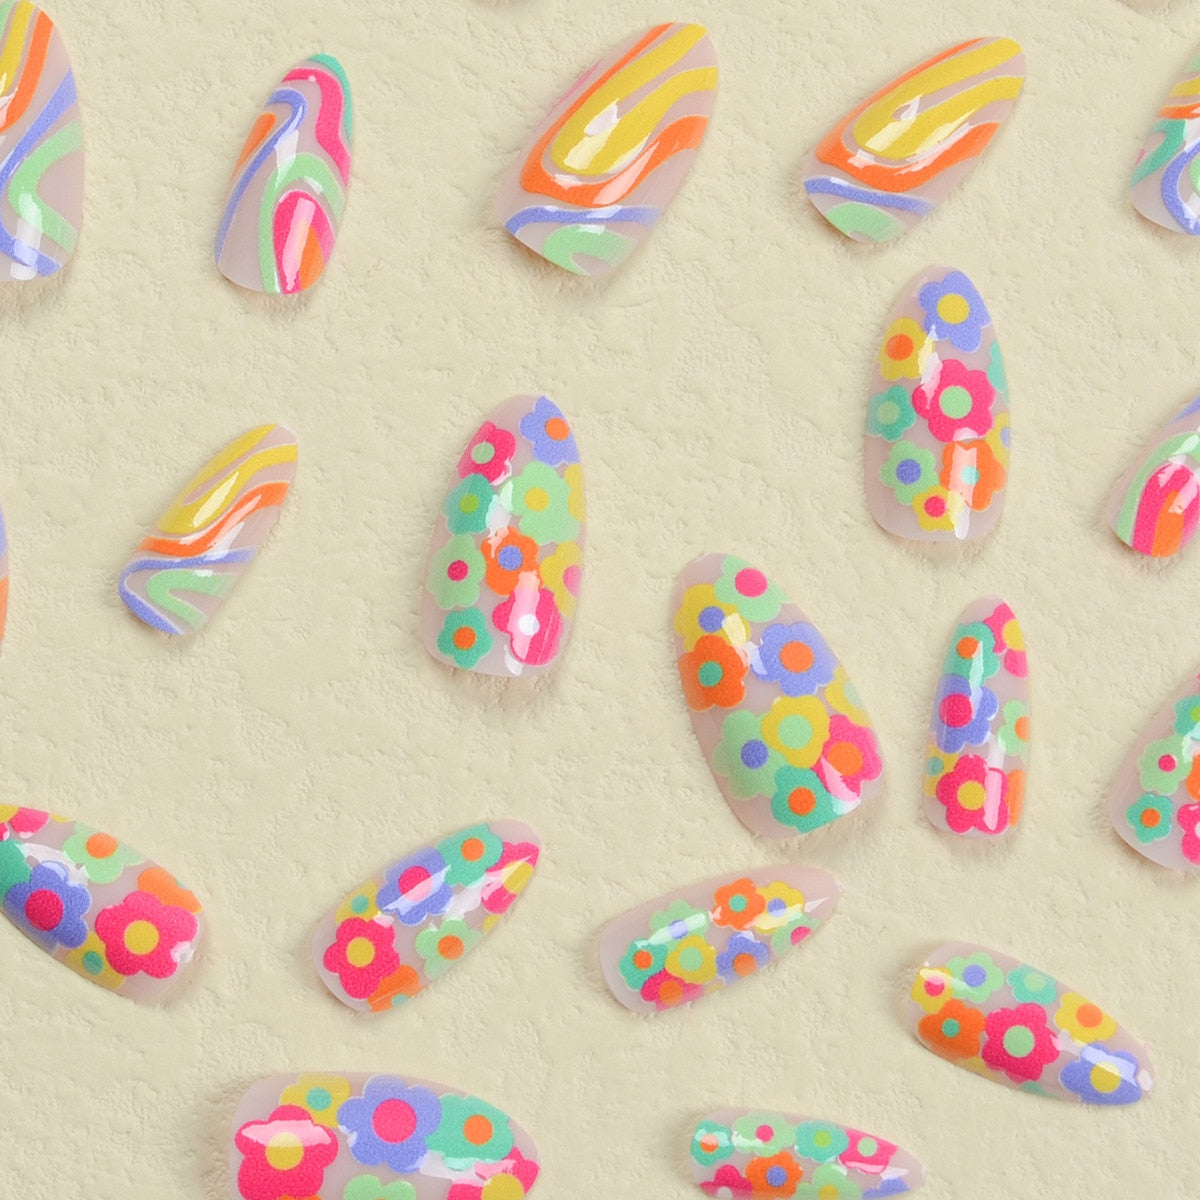 Maytrends 24pcs Girlish Colorful Graffiti Nail Art Fake Nails With Plants Flowers Patterns Short Press on False Nails With Wearing Tools